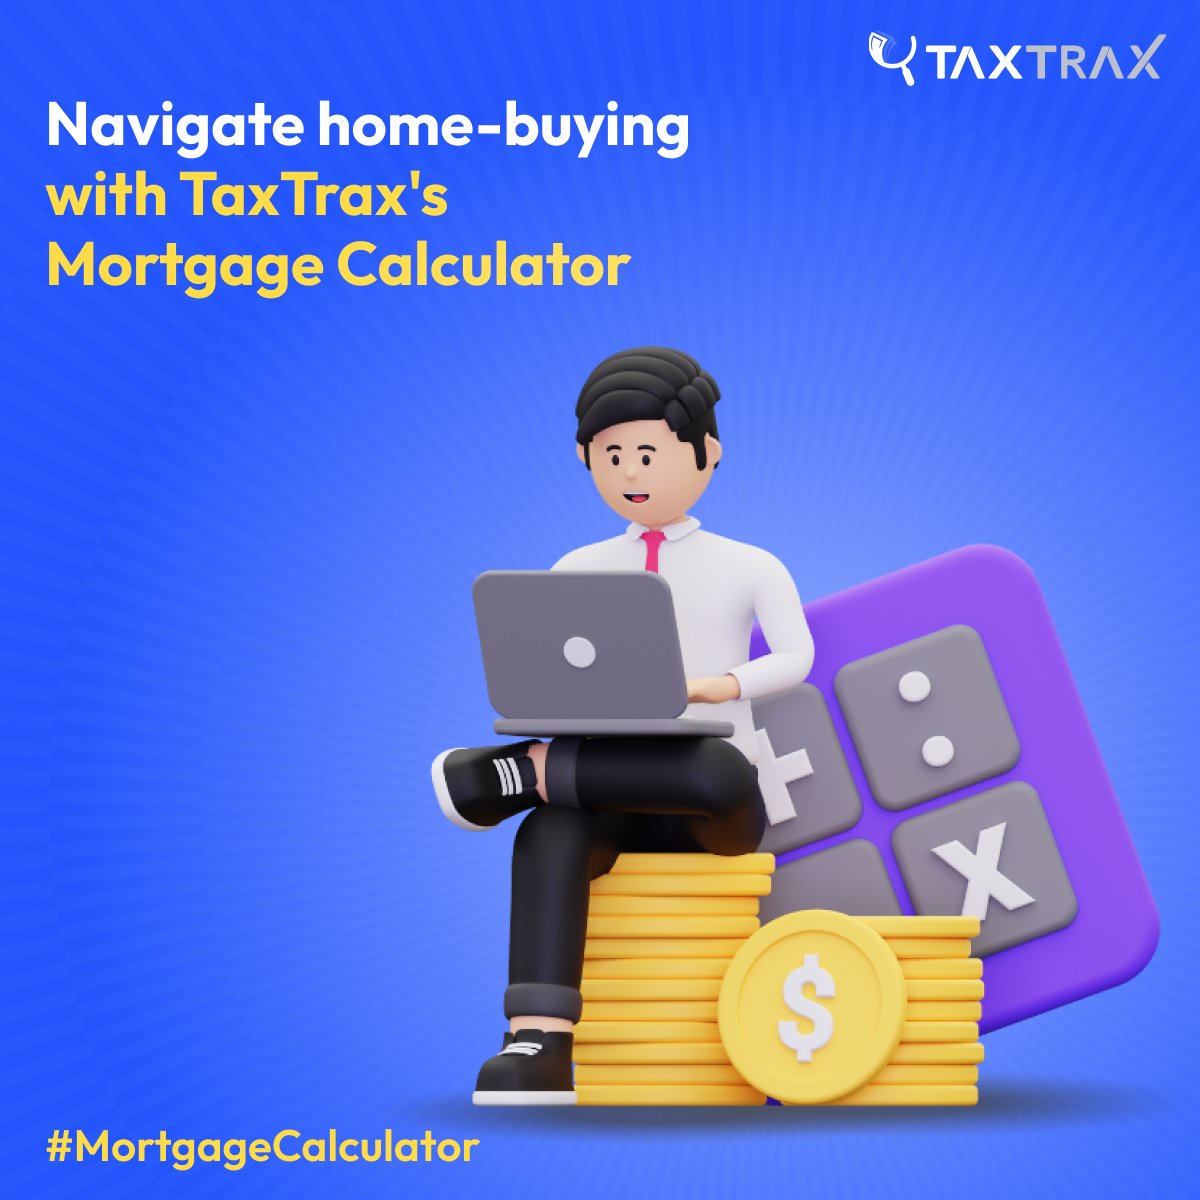 Navigate home-buying with TaxTrax's Mortgage Calculator

Visit: tax-trax.com

#Tax #taxfiling #taxation #incometax #businesstax #business #calculator #aicalculator #taxcalculator